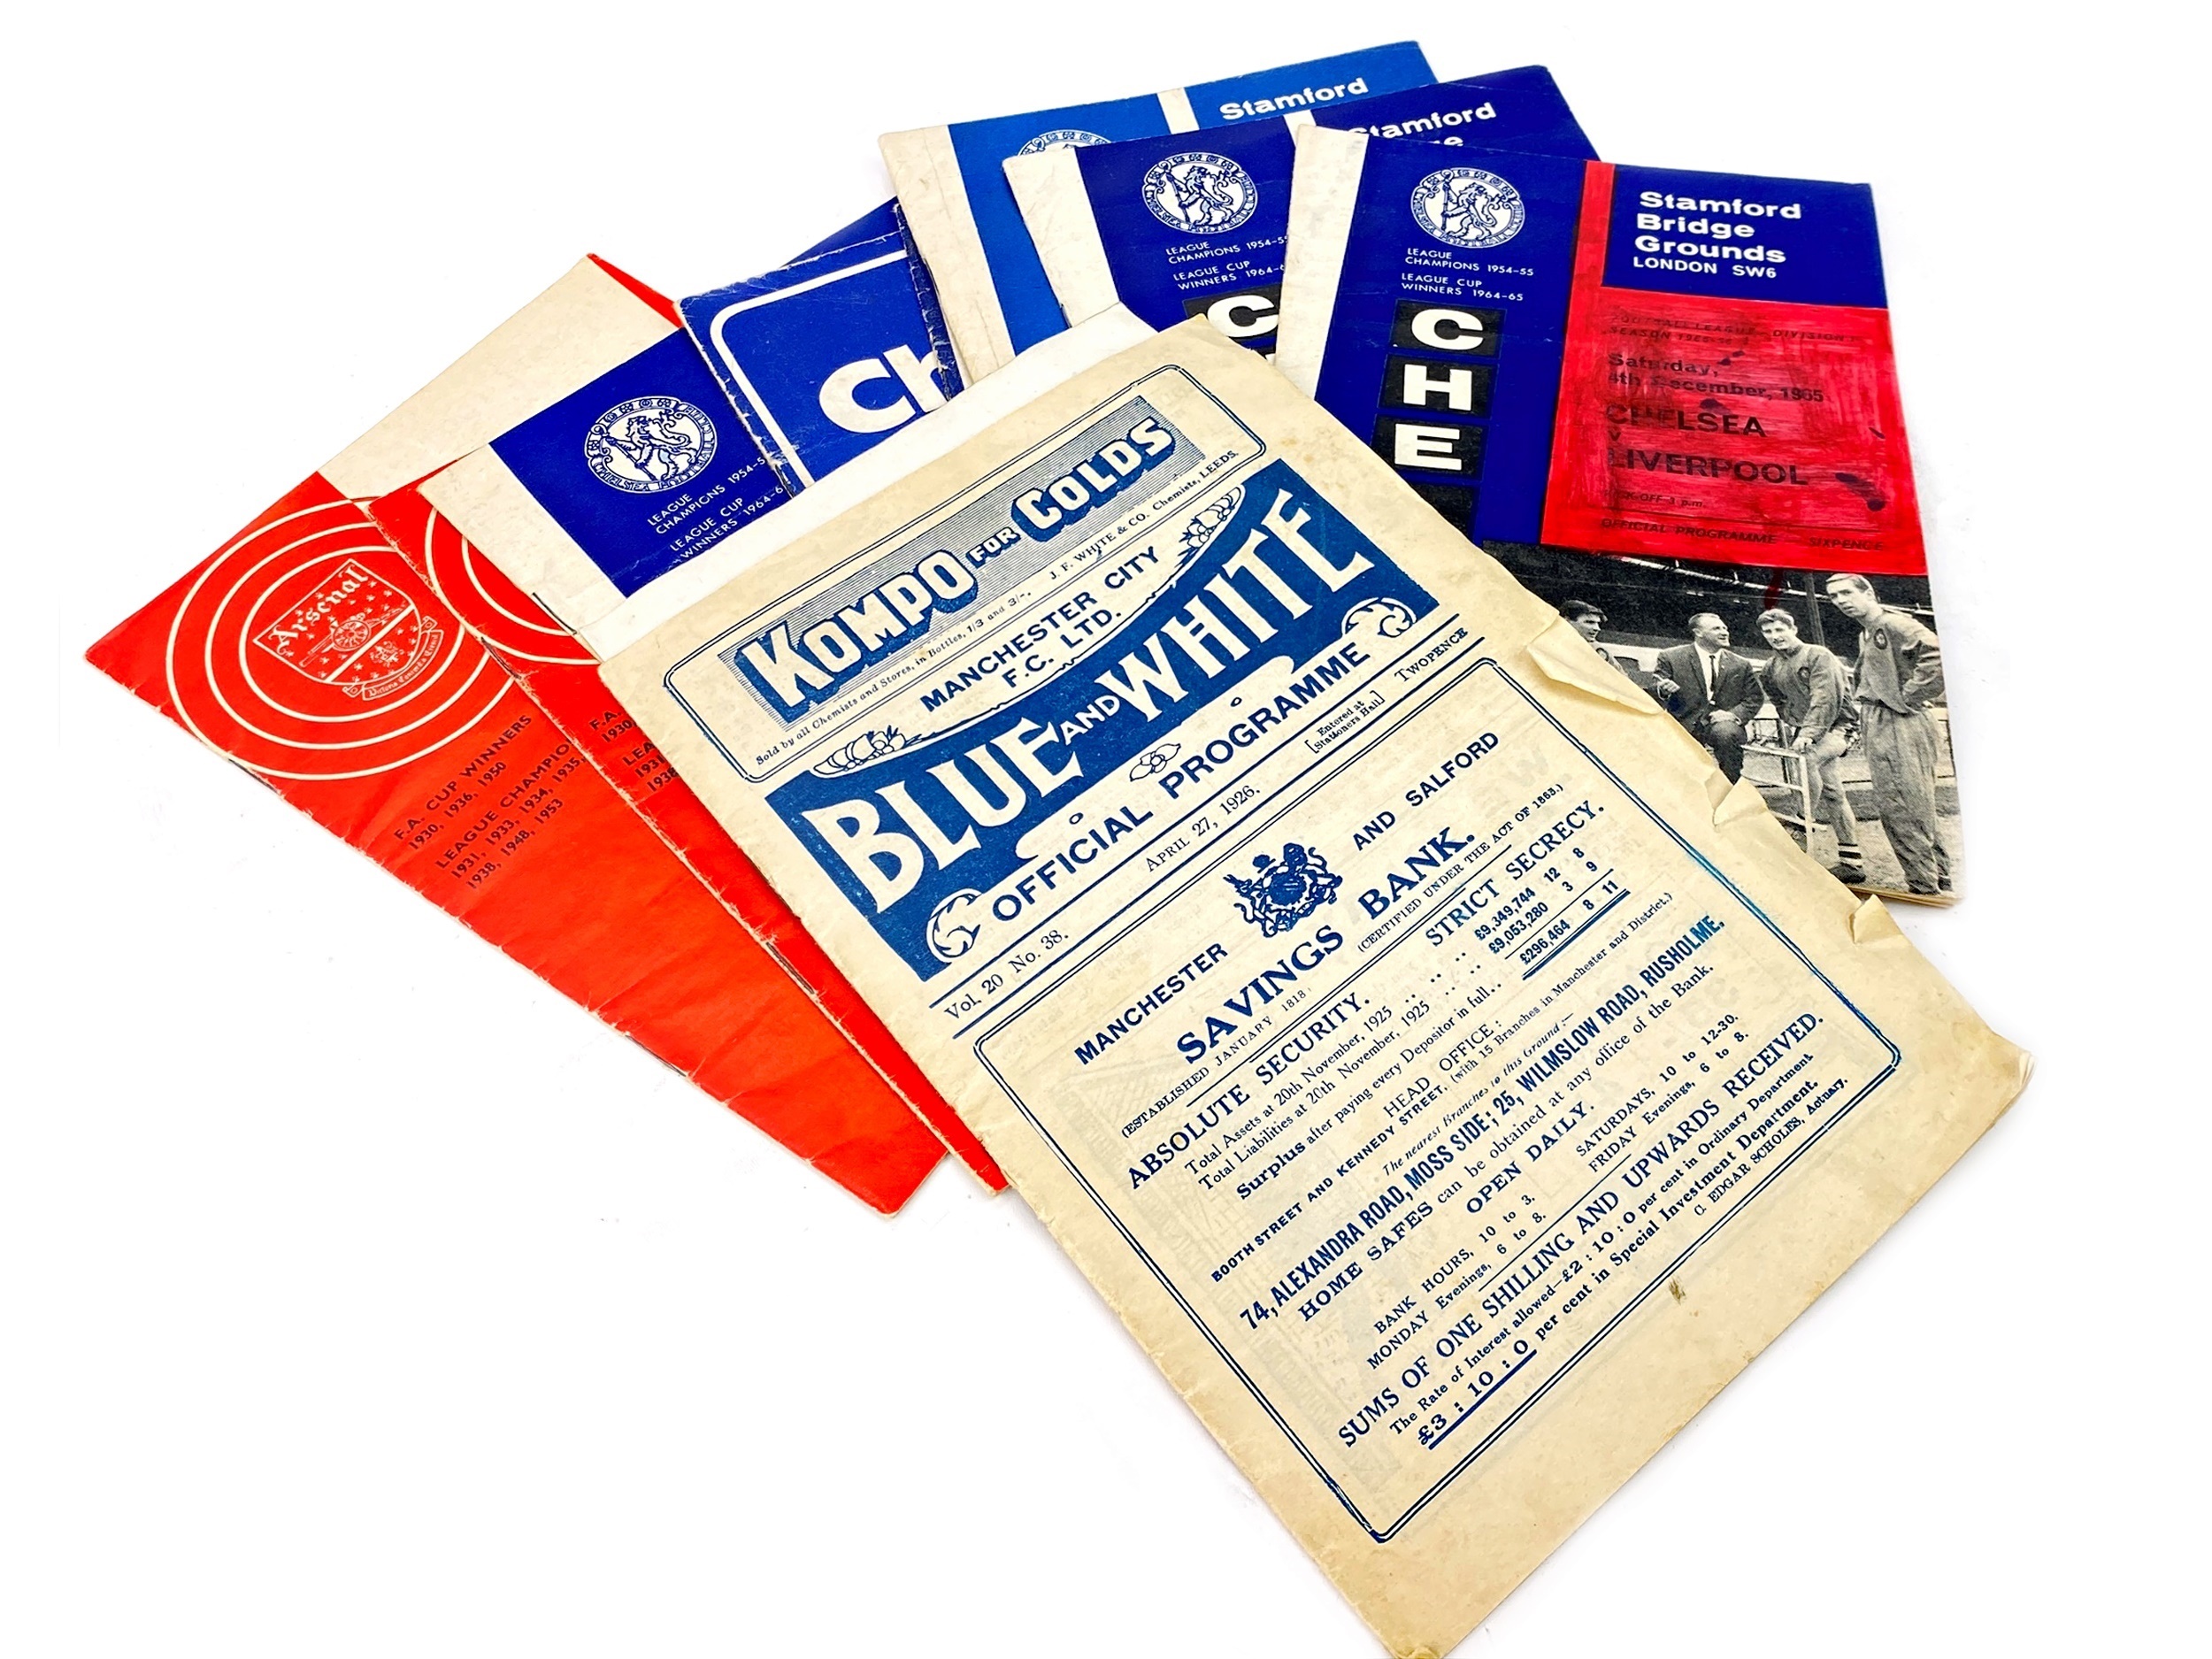 A MANCHESTER CITY F.C. BLUE AND WHITE OFFICIAL PROGRAMME AND OTHER FOOTBALL PROGRAMMES